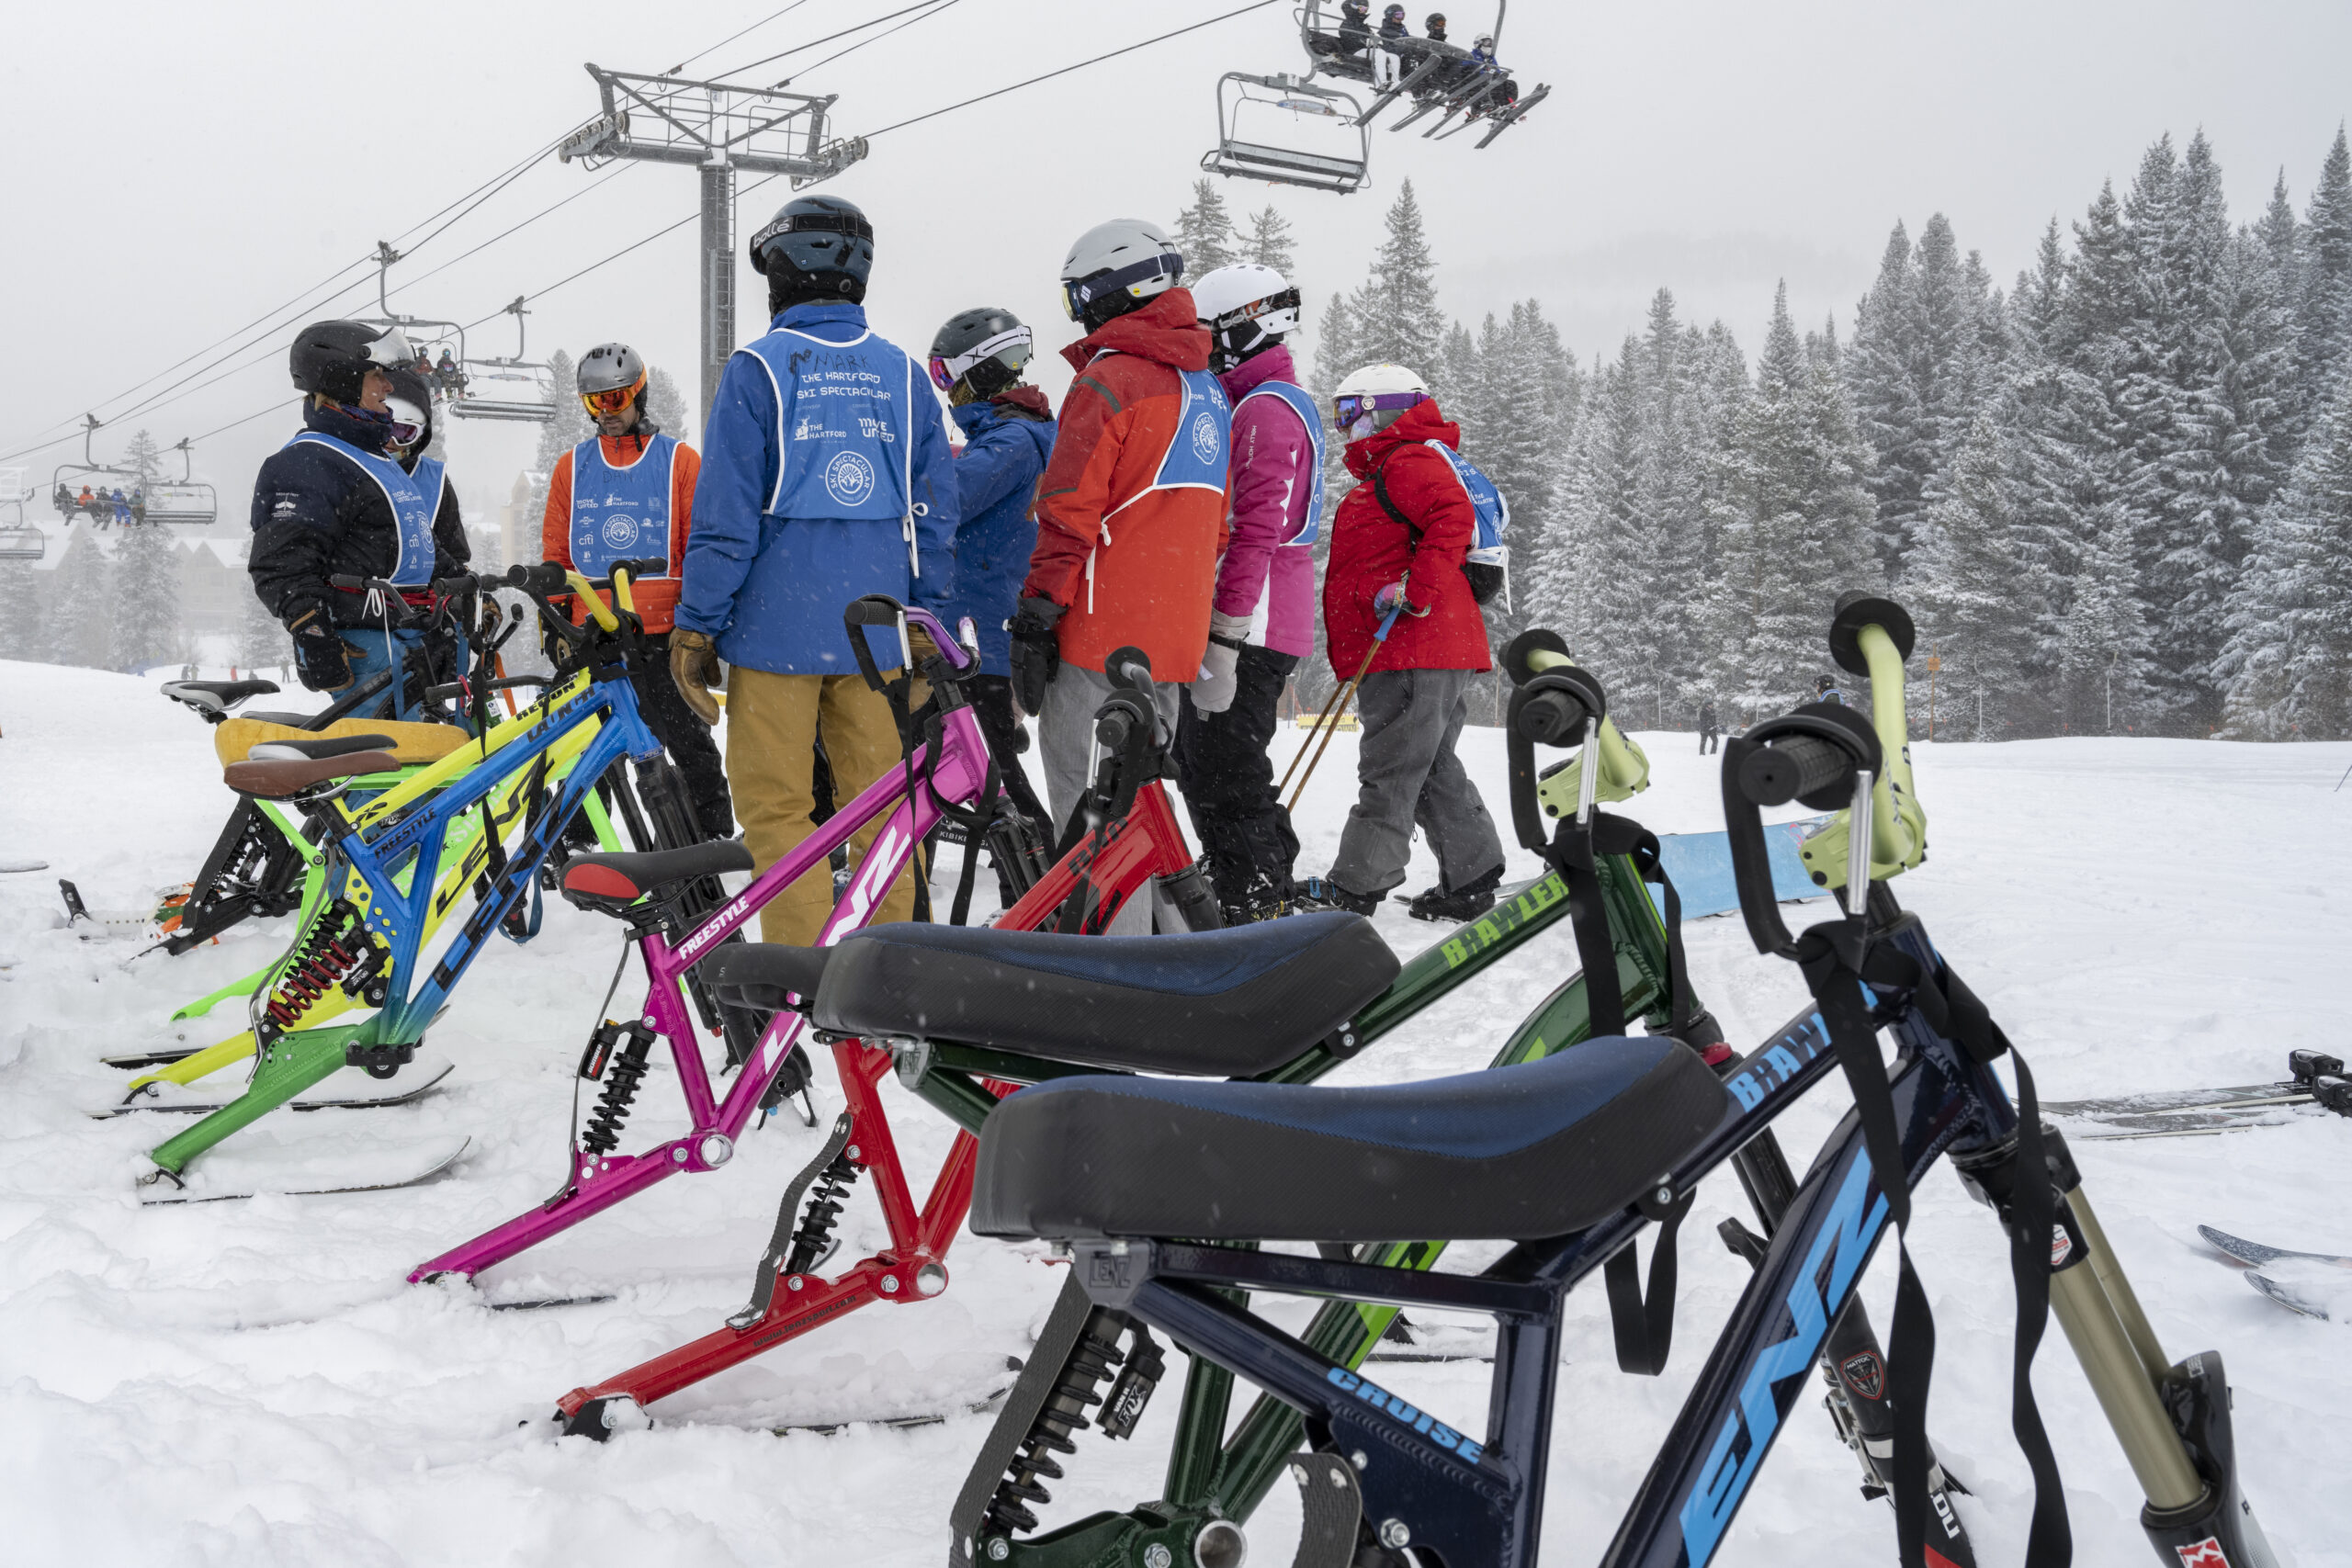 Group of people standing at the top of a ski hill